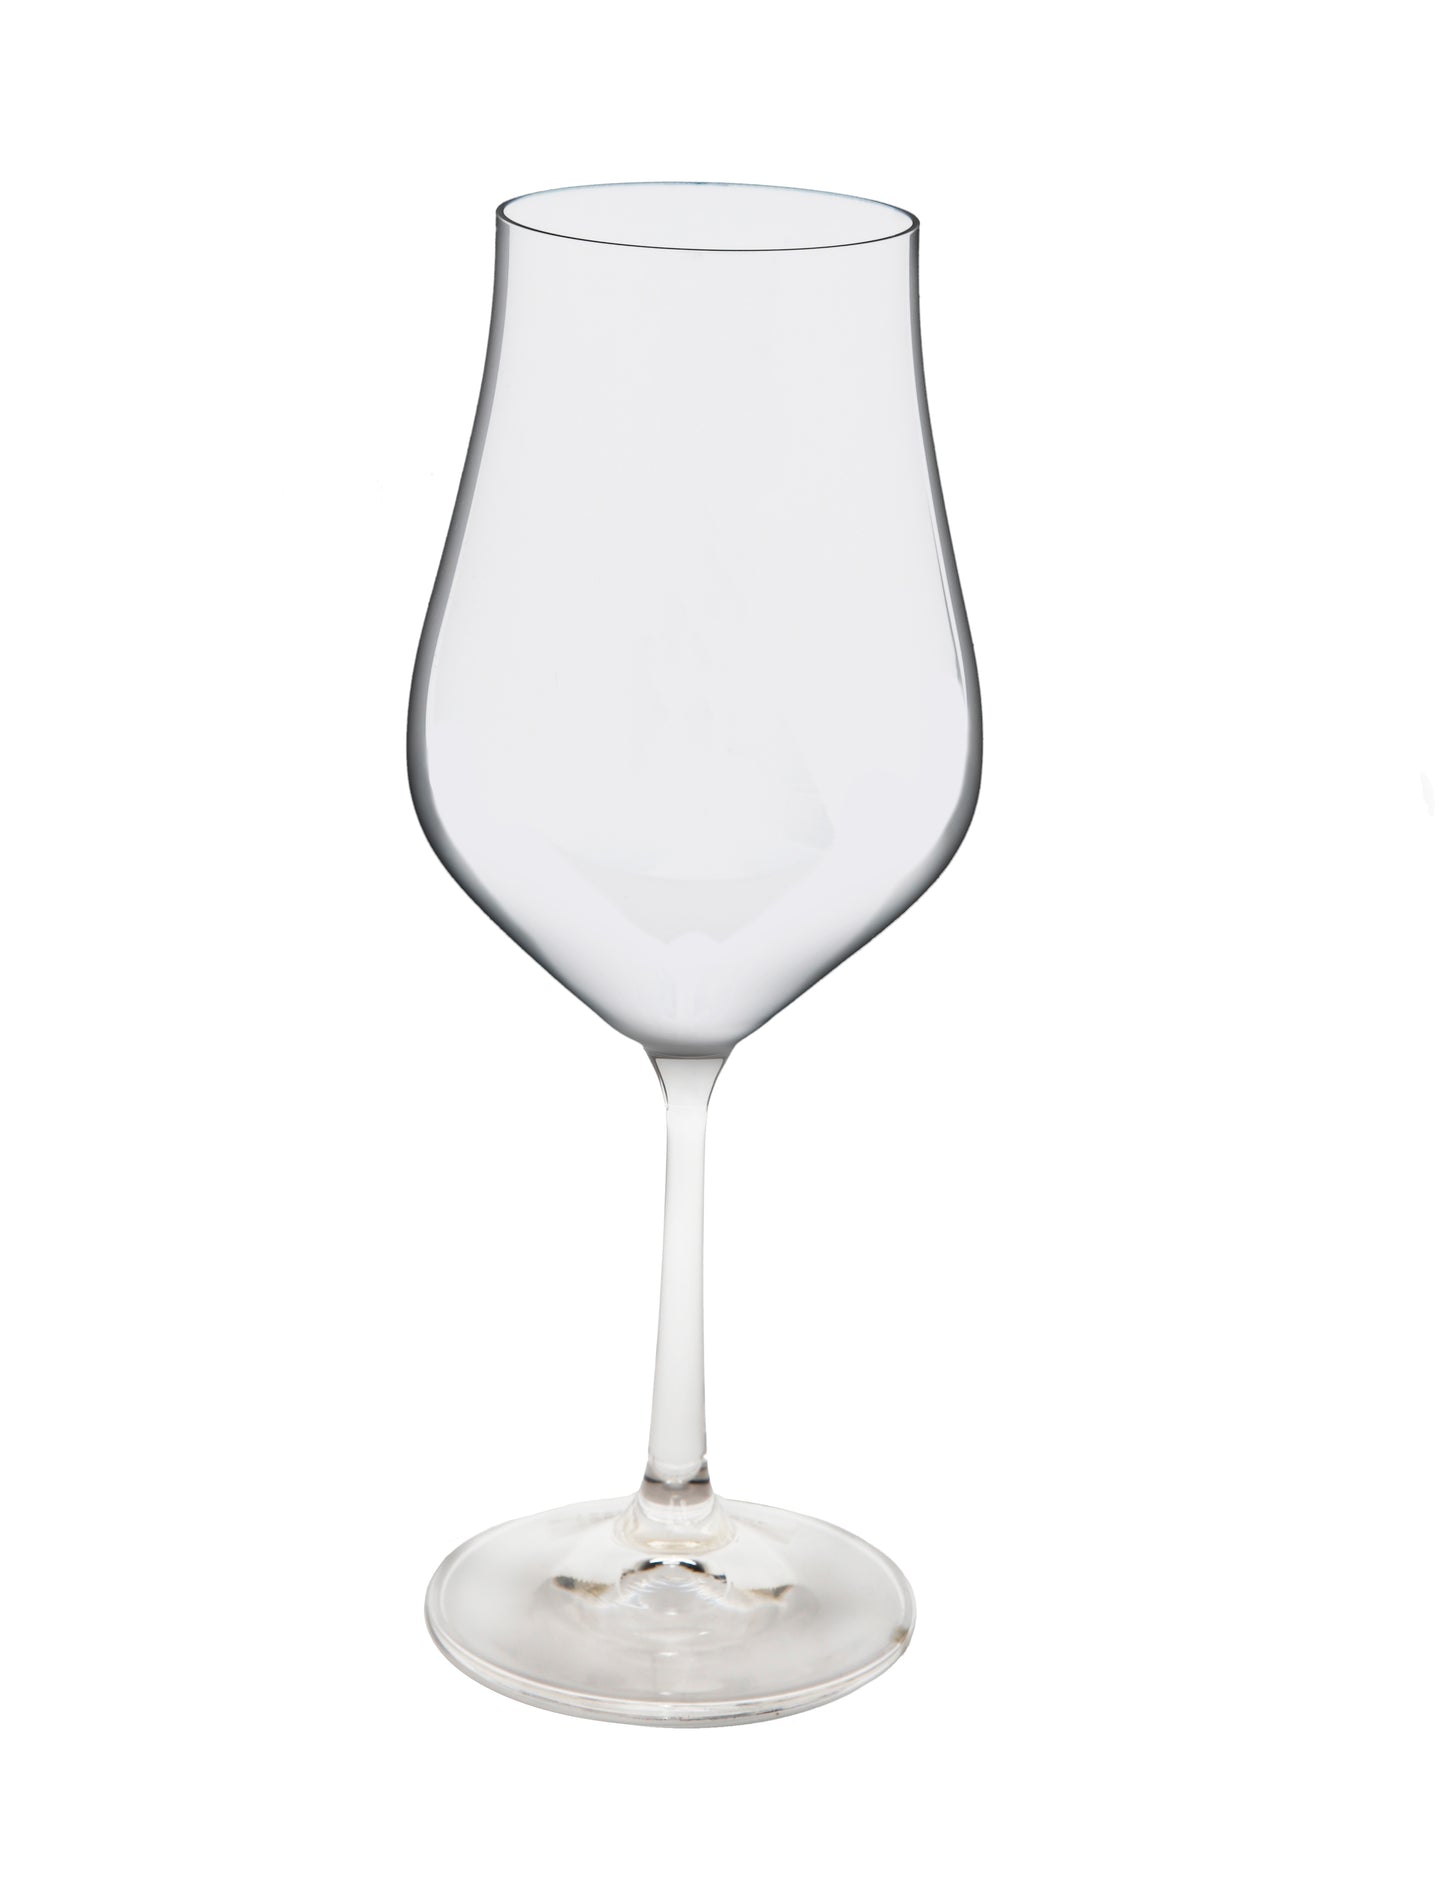 Set of 6 White Wine Glasses with Clear Stem